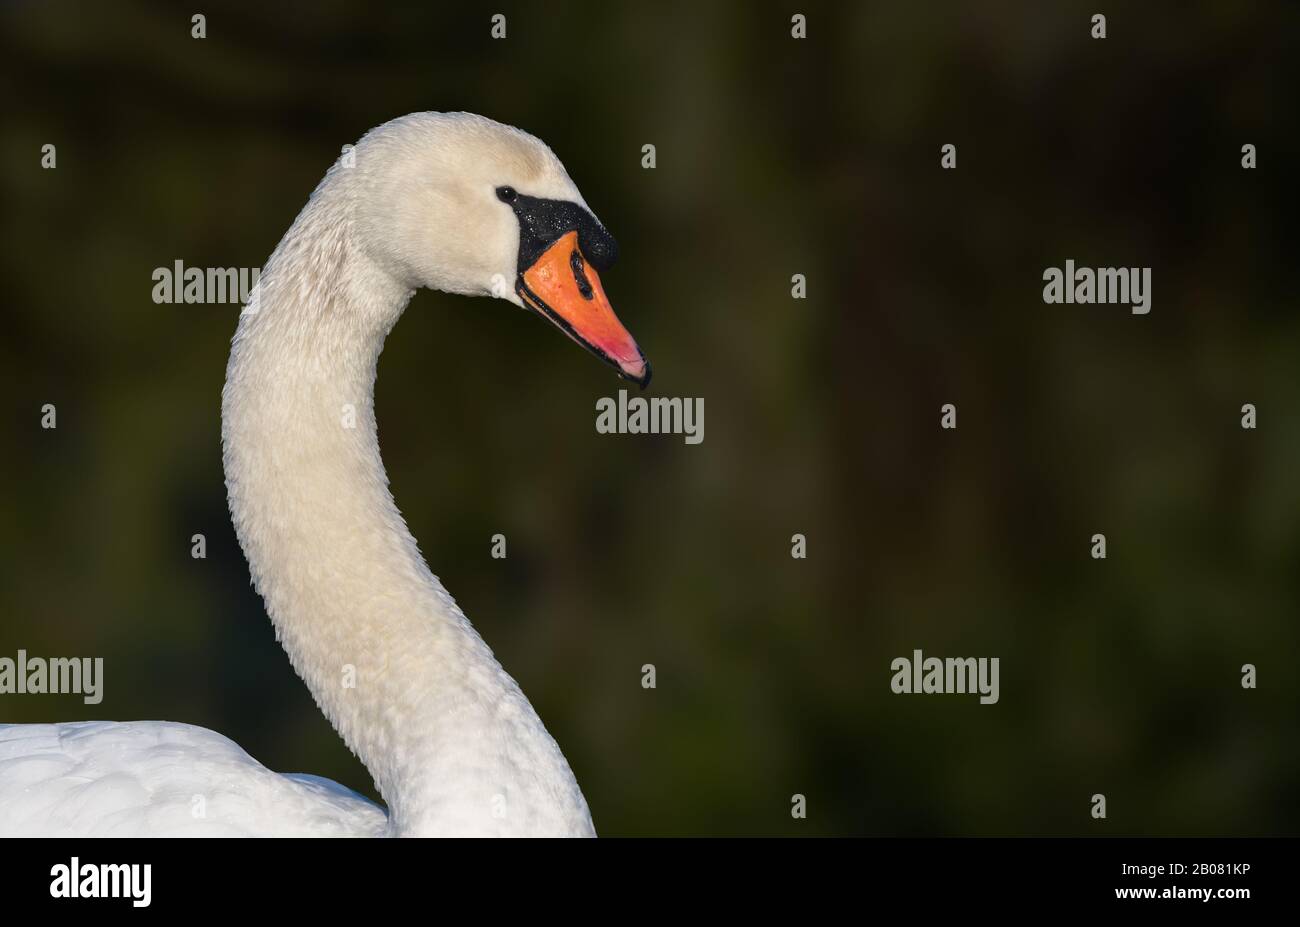 White Mute Swan (Cygnus olor) head & neck, side view, with copy space. Stock Photo